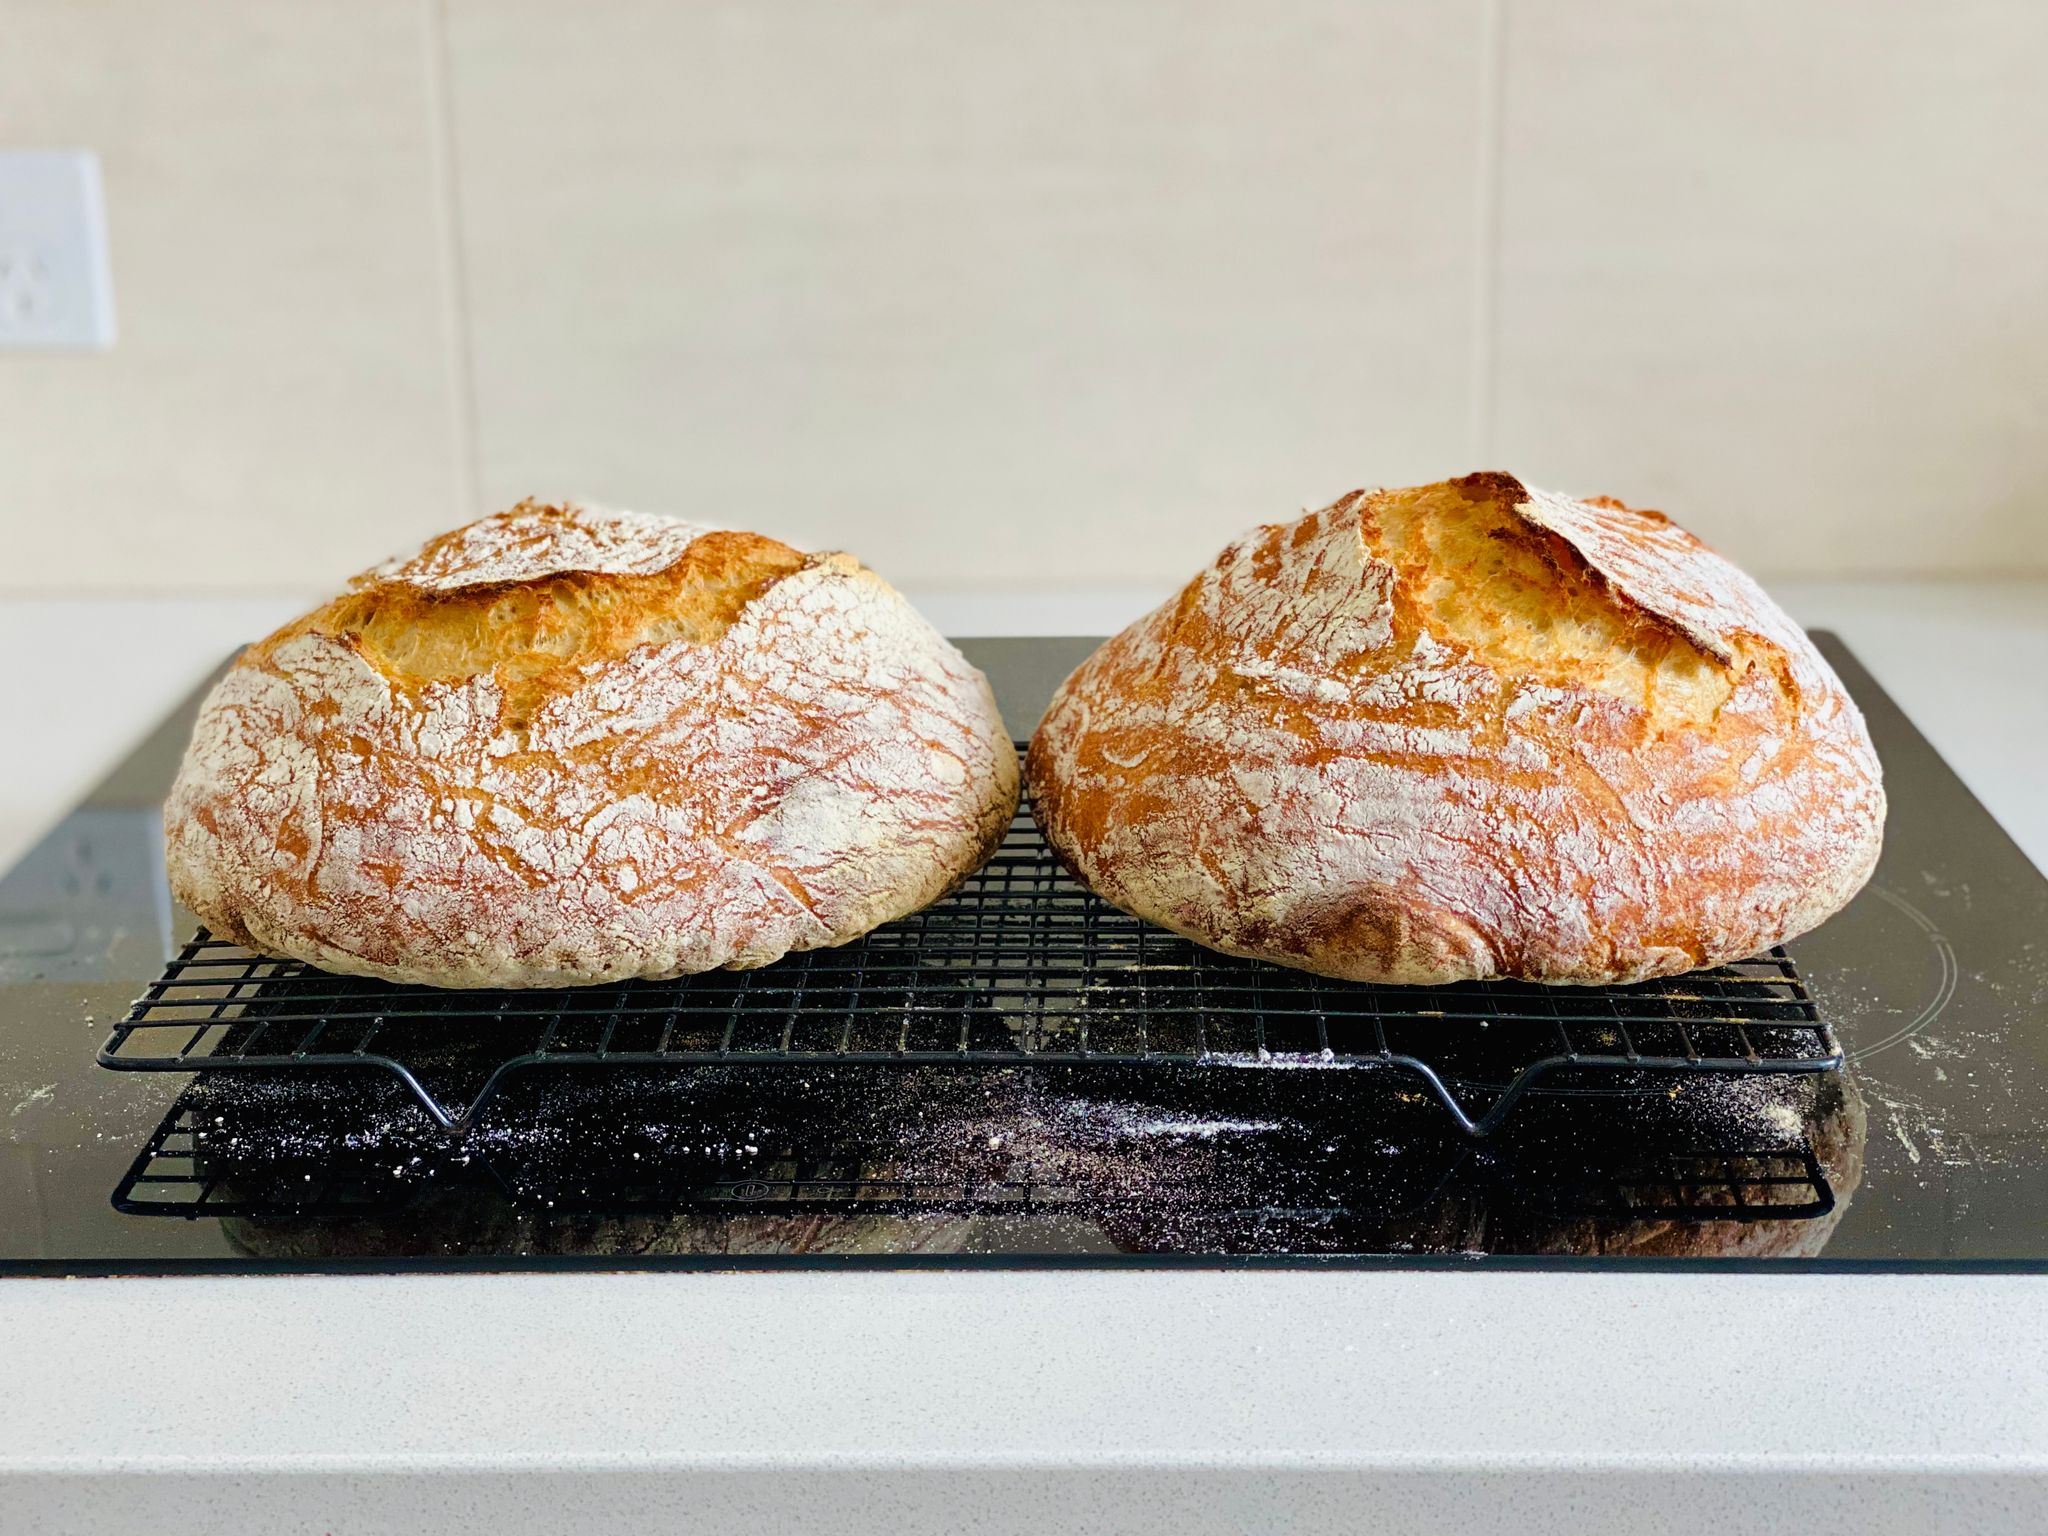 A photo of two round golden brown loaves of bread dusted with flour sitting on a cooling rack.